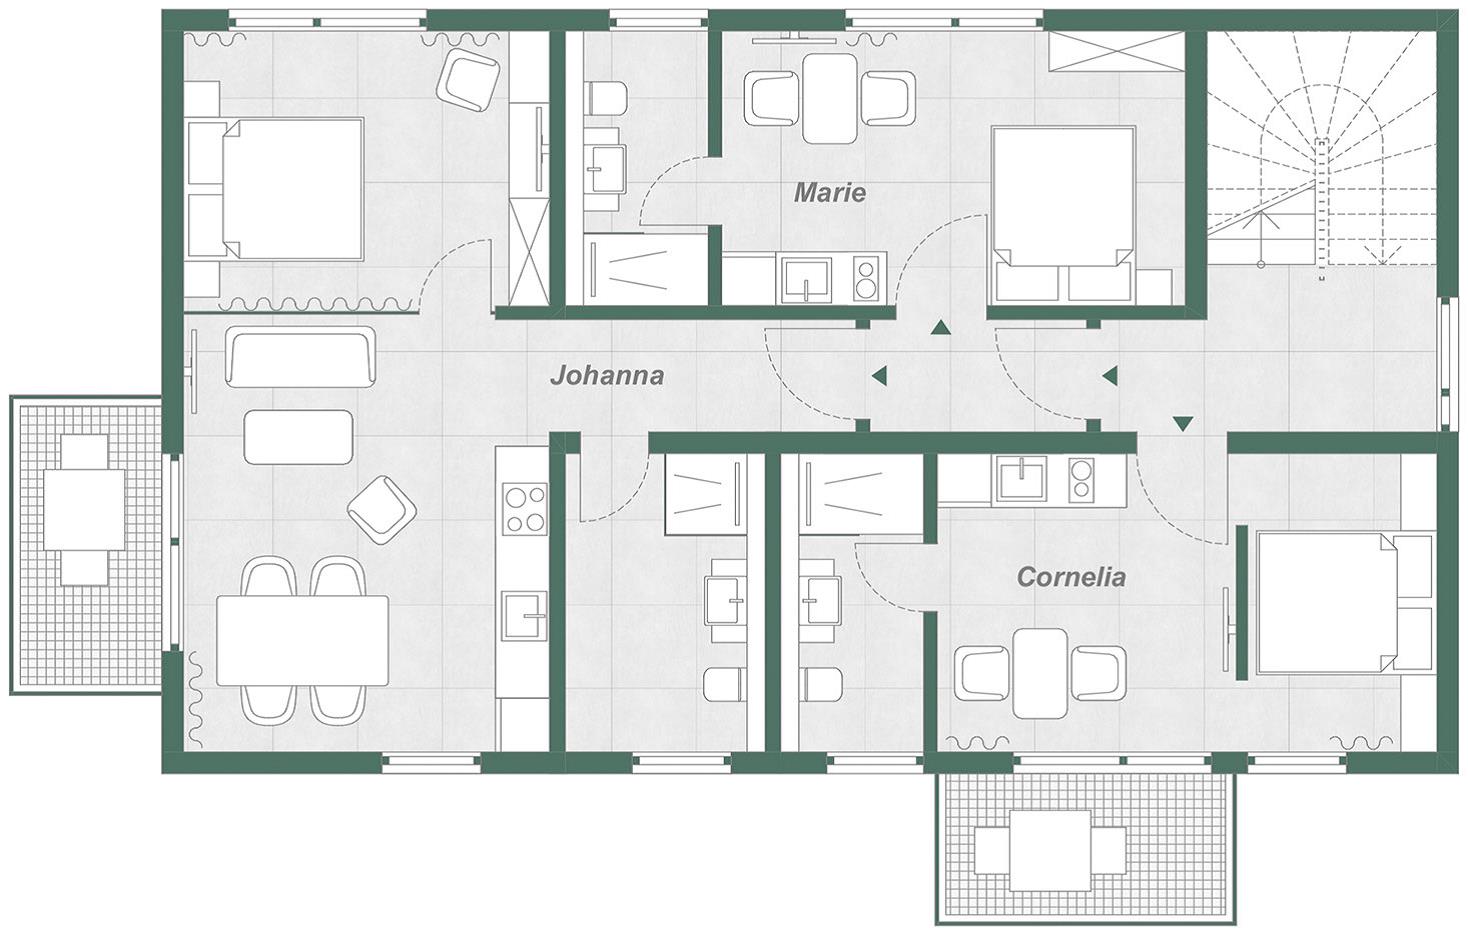 The one- and two-room apartments